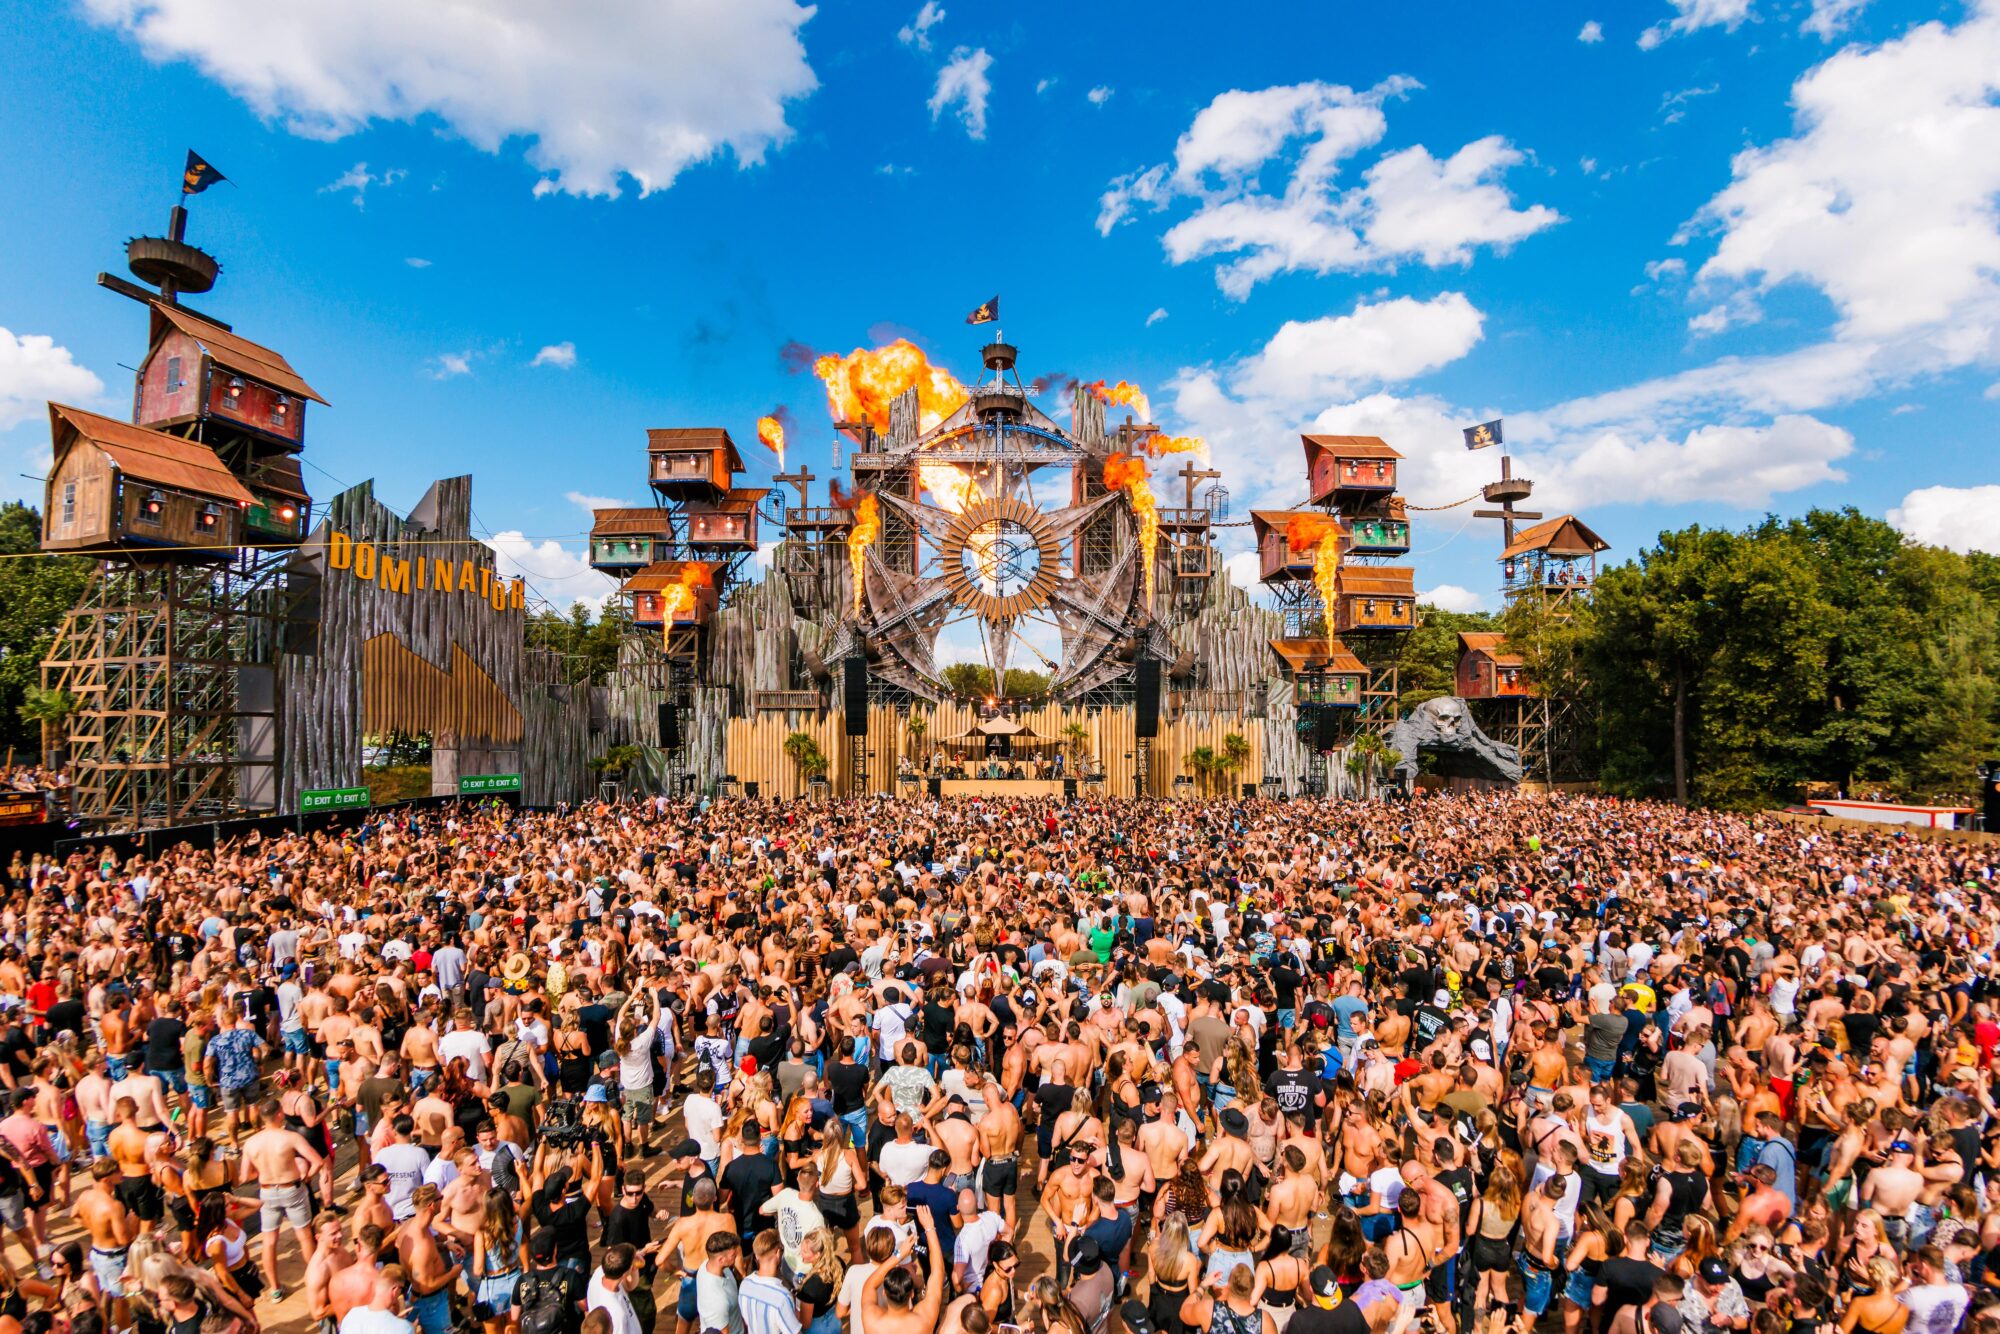 check-the-full-photo-album-of-dominator-festival-2023-voyage-of-the